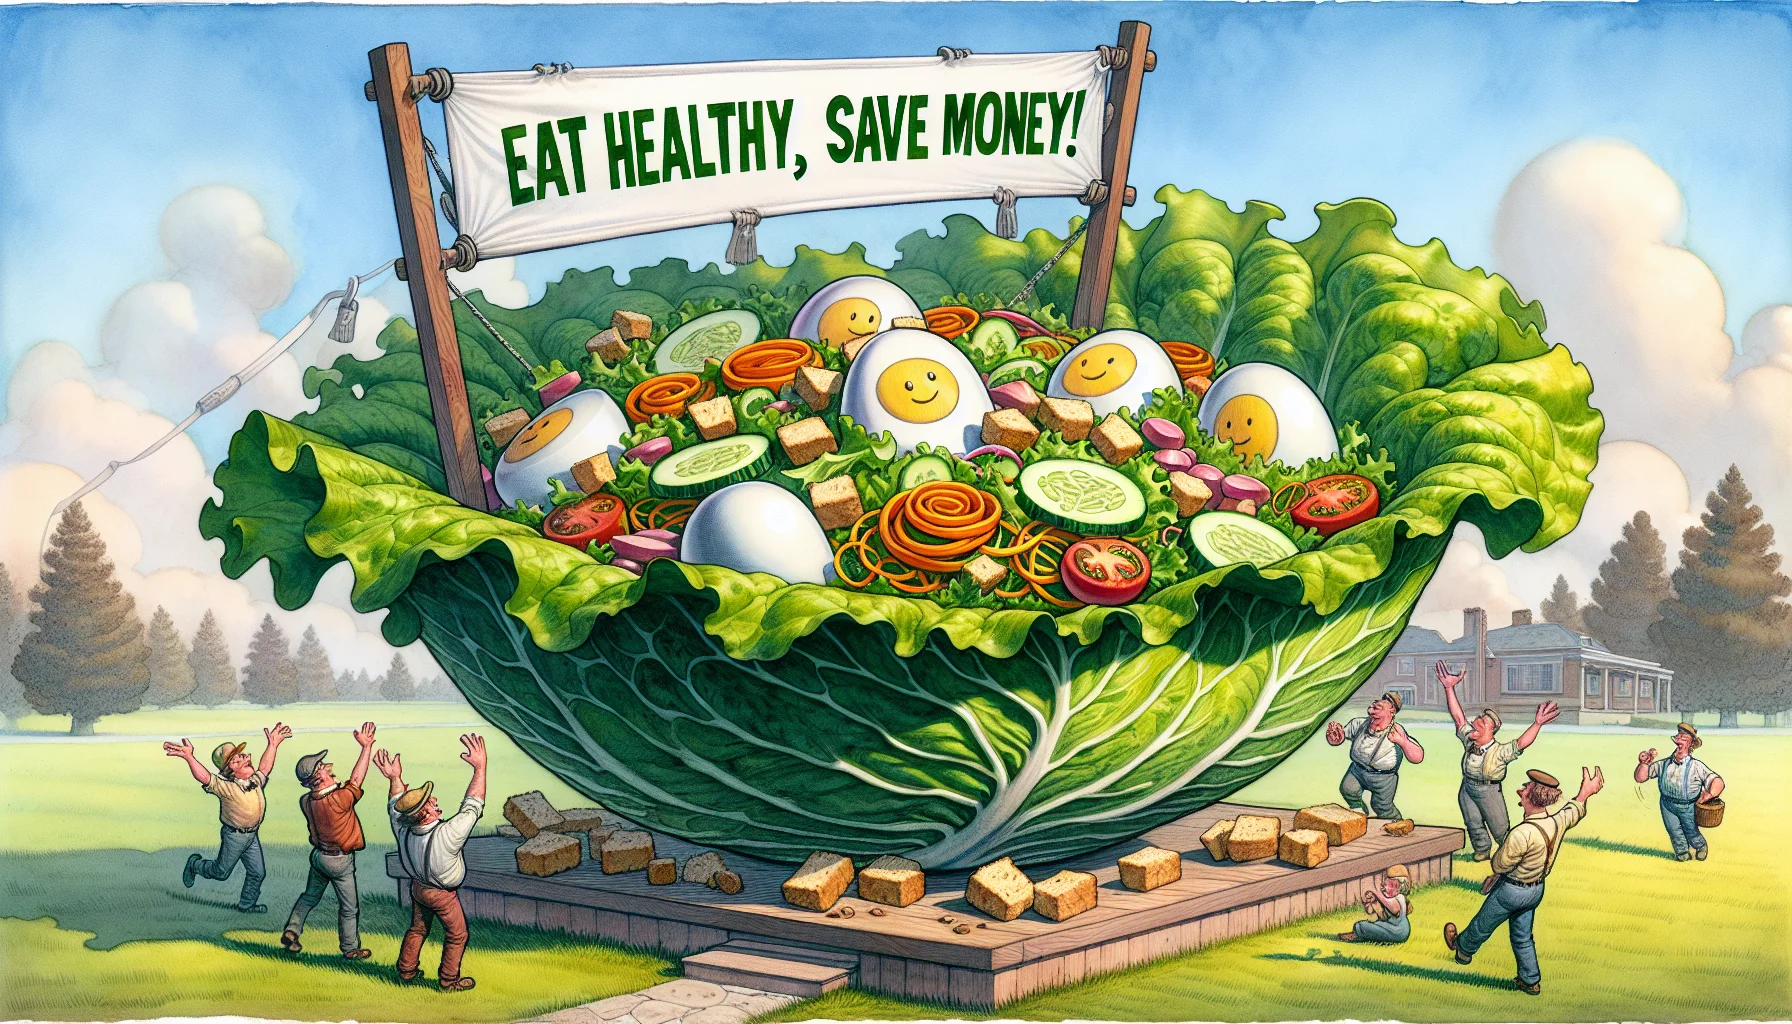 Imagine a fun, preposterously amusing scene promoting thrifty healthy eating. Picture a massive salad bowl nestled comfortably in a gigantic lettuce leaf hammock, swaying gently on a sunny day. The salad is a vibrant puzzle of fresh veggies, spiraled carrots, crisp cucumber, succulent cherry tomatoes, leafy greens, and clusters of crunchy croutons. Amongst this, hard-boiled eggs with playful cheery faces, gazing up at a big banner overhead that reads, 'Eat Healthy, Save Money!'. The whimsy is amplified by artists like cartoonists from the late 19th century, invoking humor and simplicity. Paint this scenario in watercolor style.